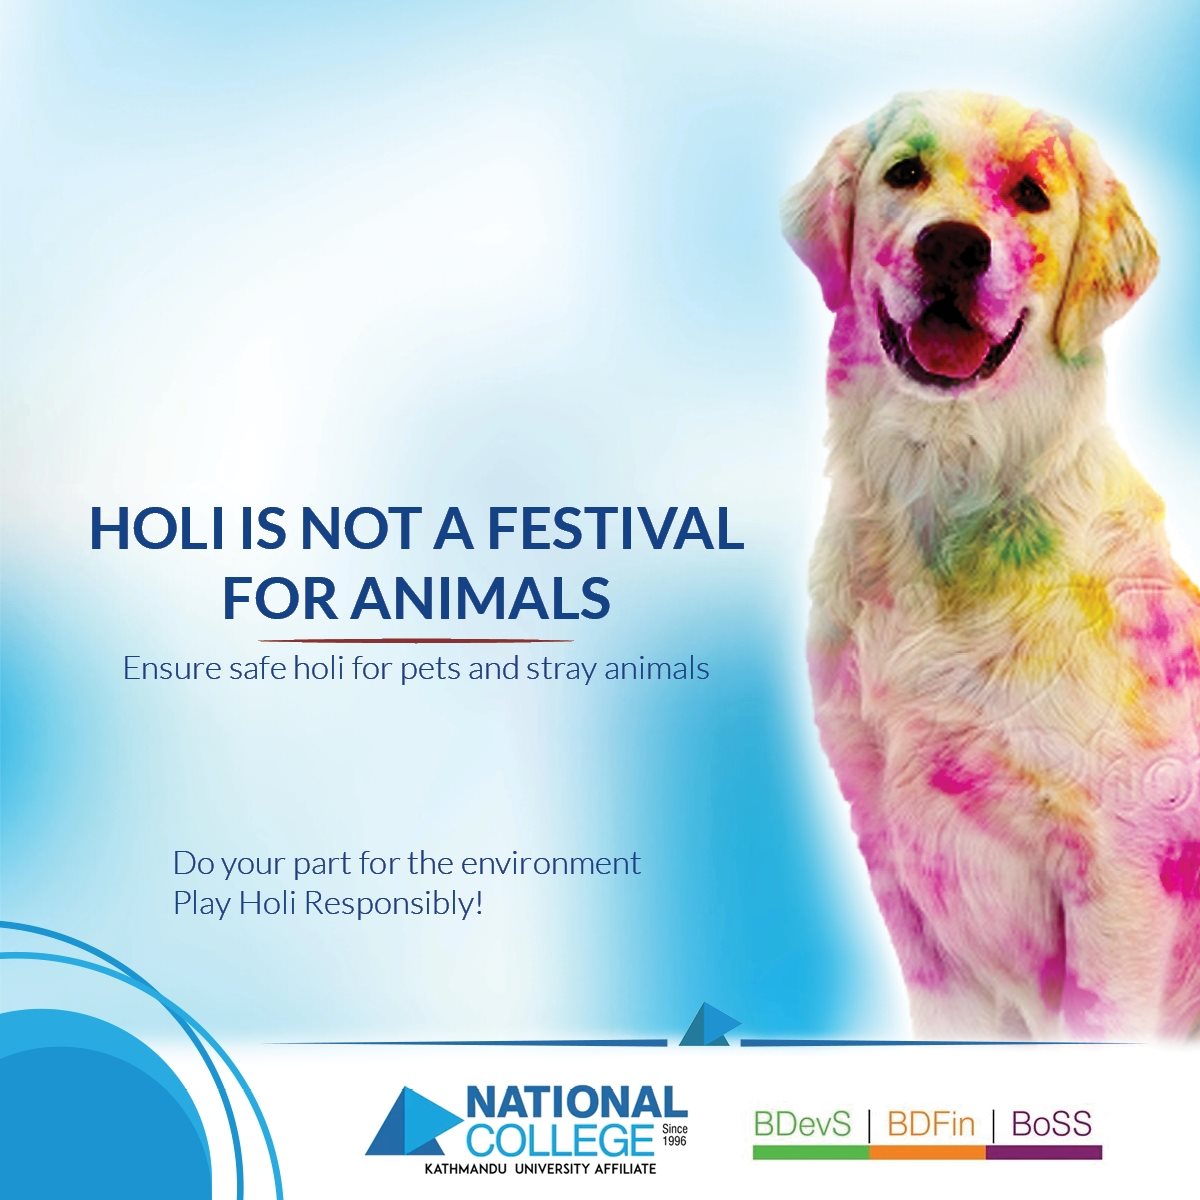 Holi is not a festival for animals